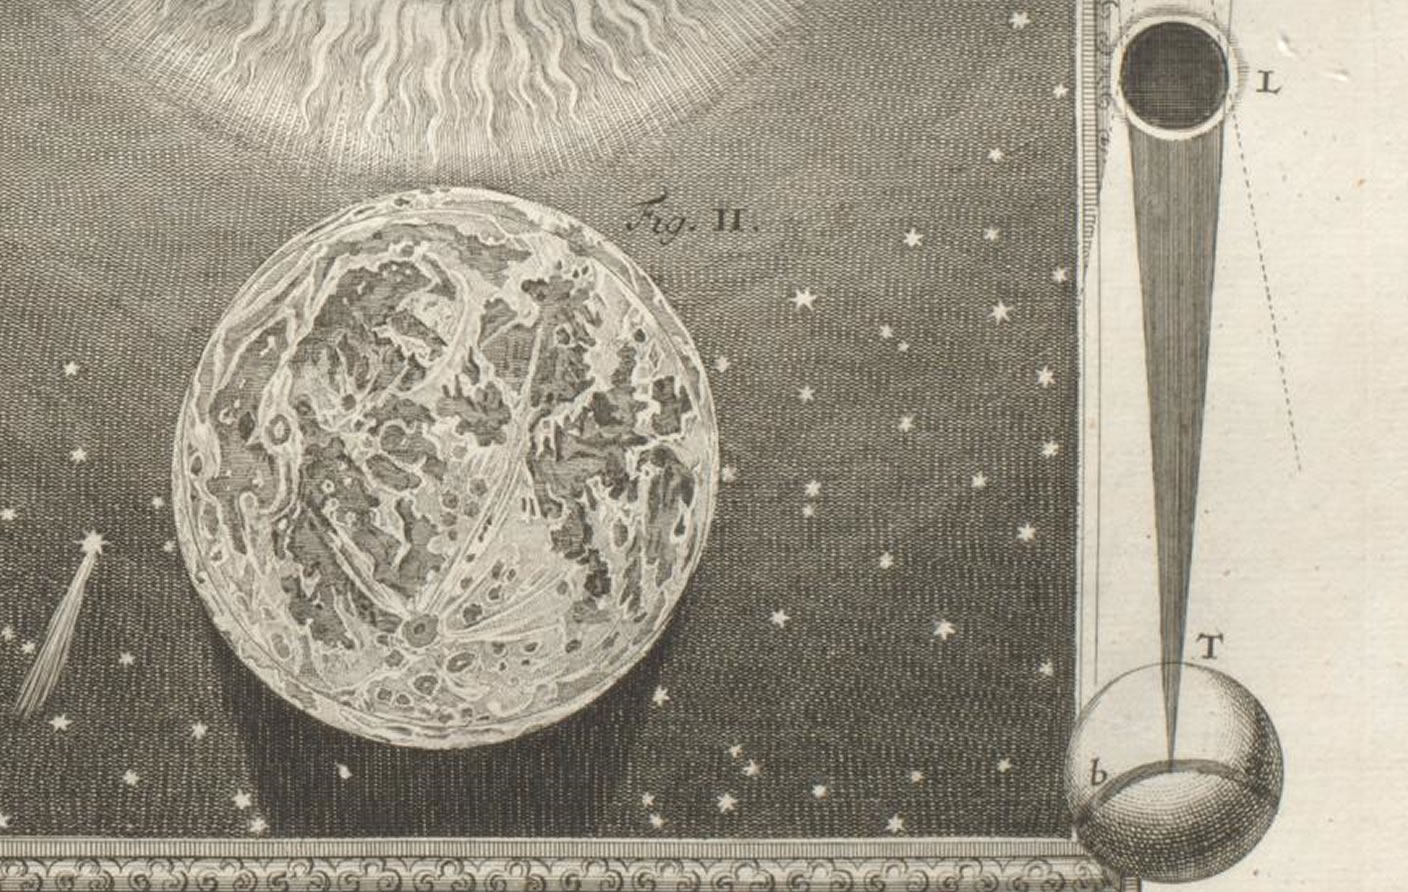 Johann Andreas Pfeffel (1674–1750) In this engraving the representation of the moon's shadow reaching earth is particularly interesting.